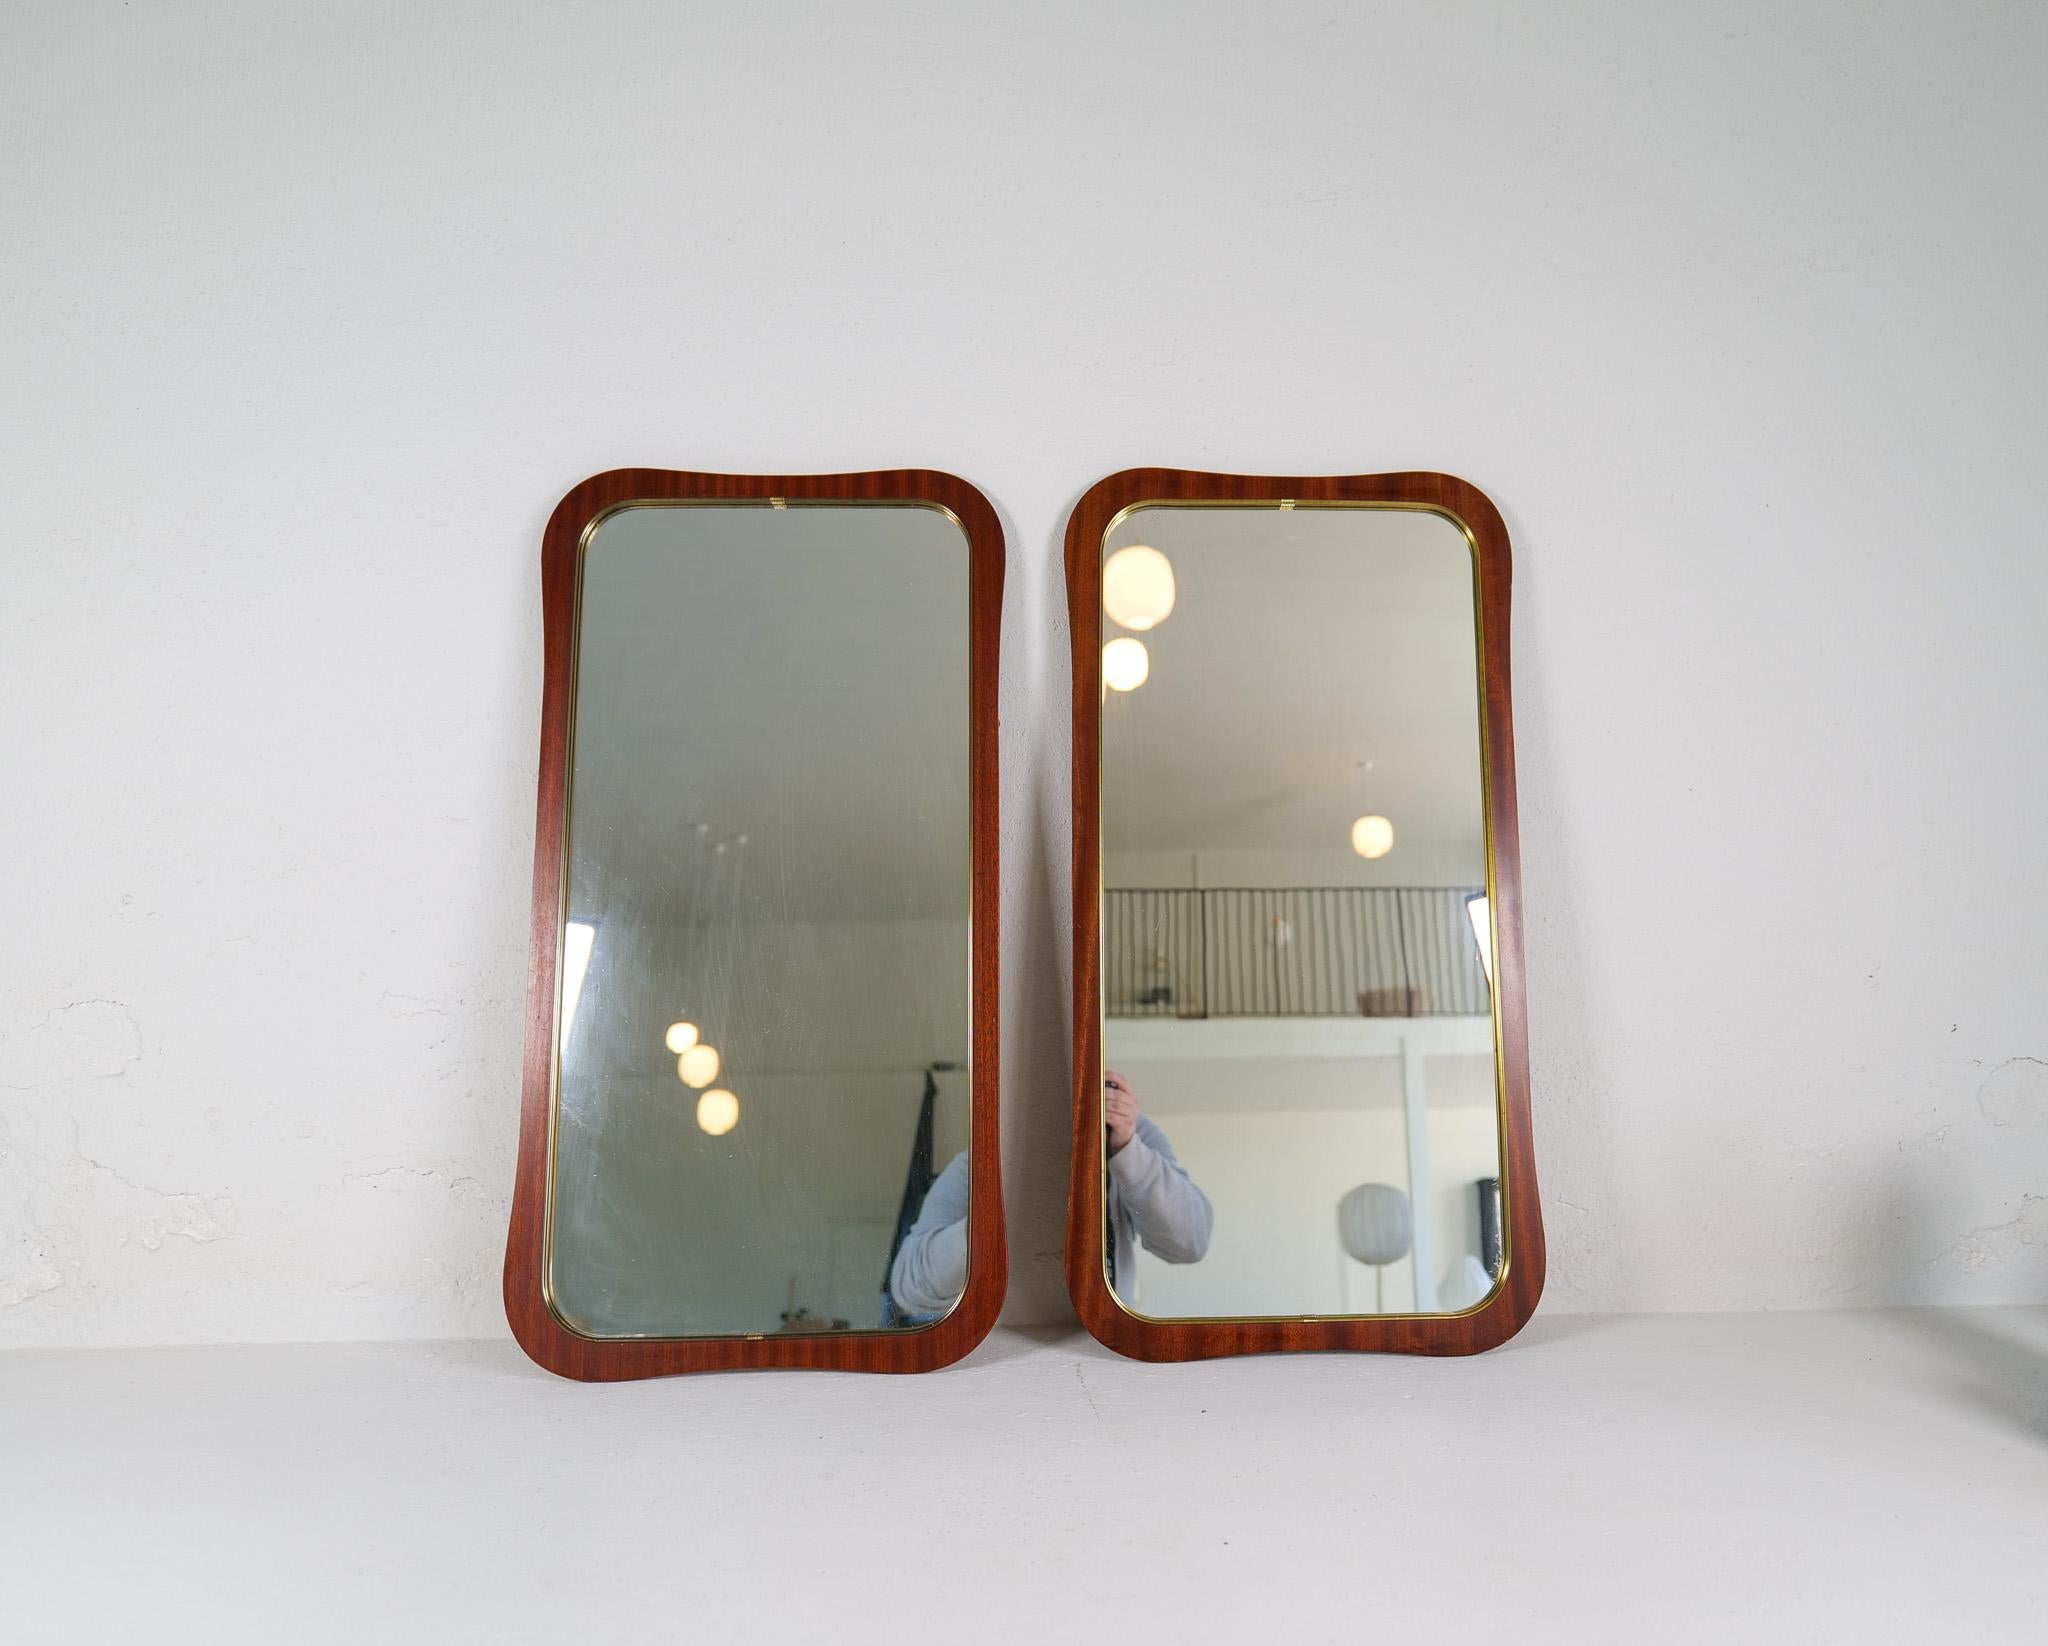 Swedish Midcentury Modern Pair of Wood and Brass Mirrors Sweden 1950s For Sale